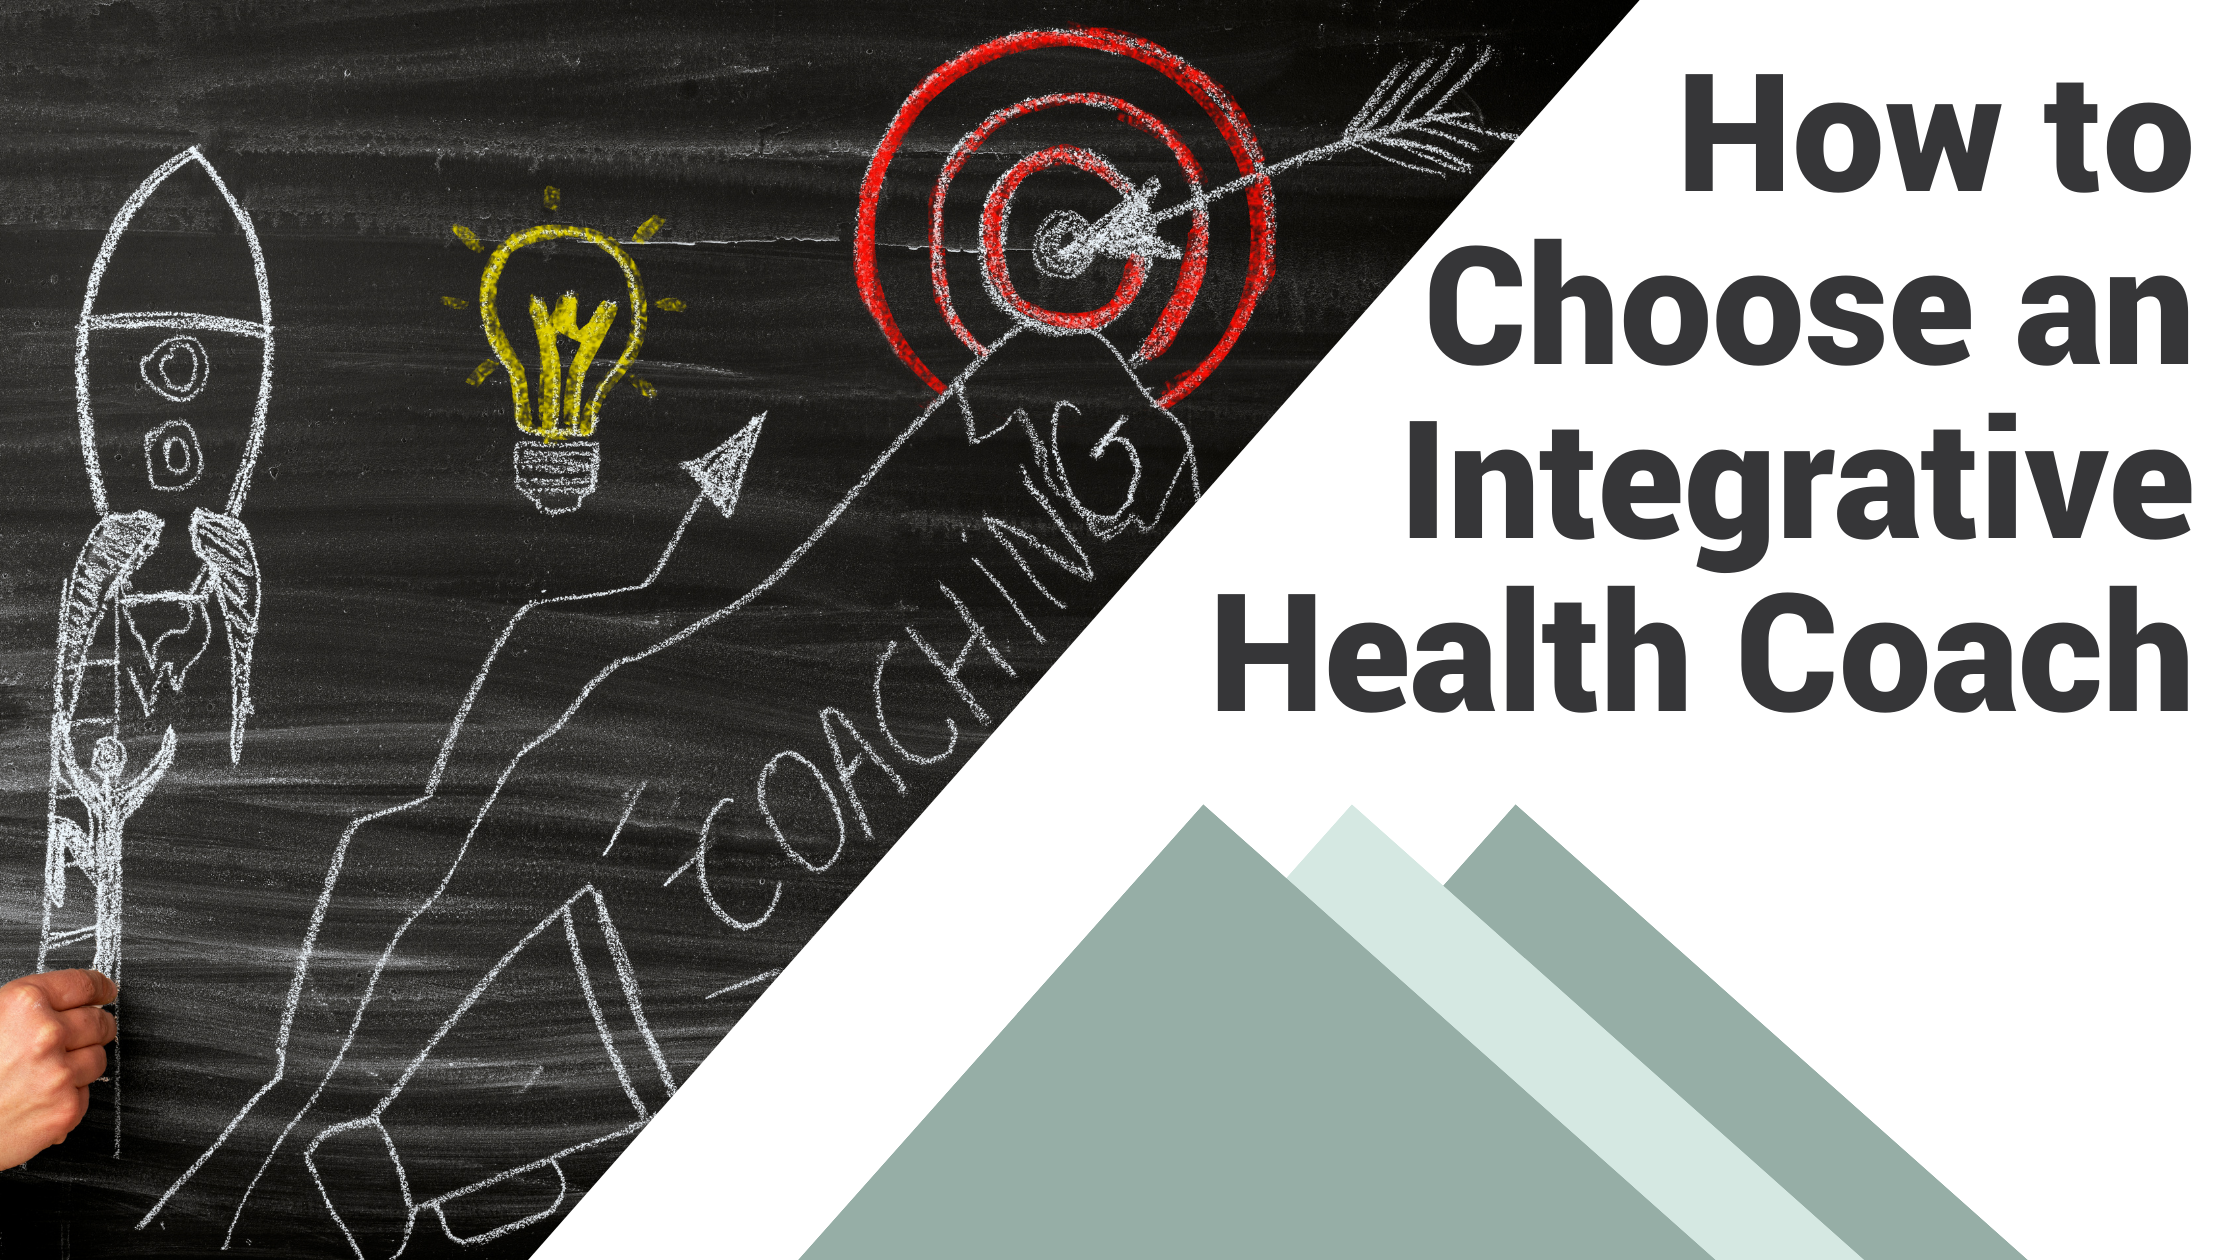 072523 How to Choose an Integrative Health Coach Email Banner Header (1)